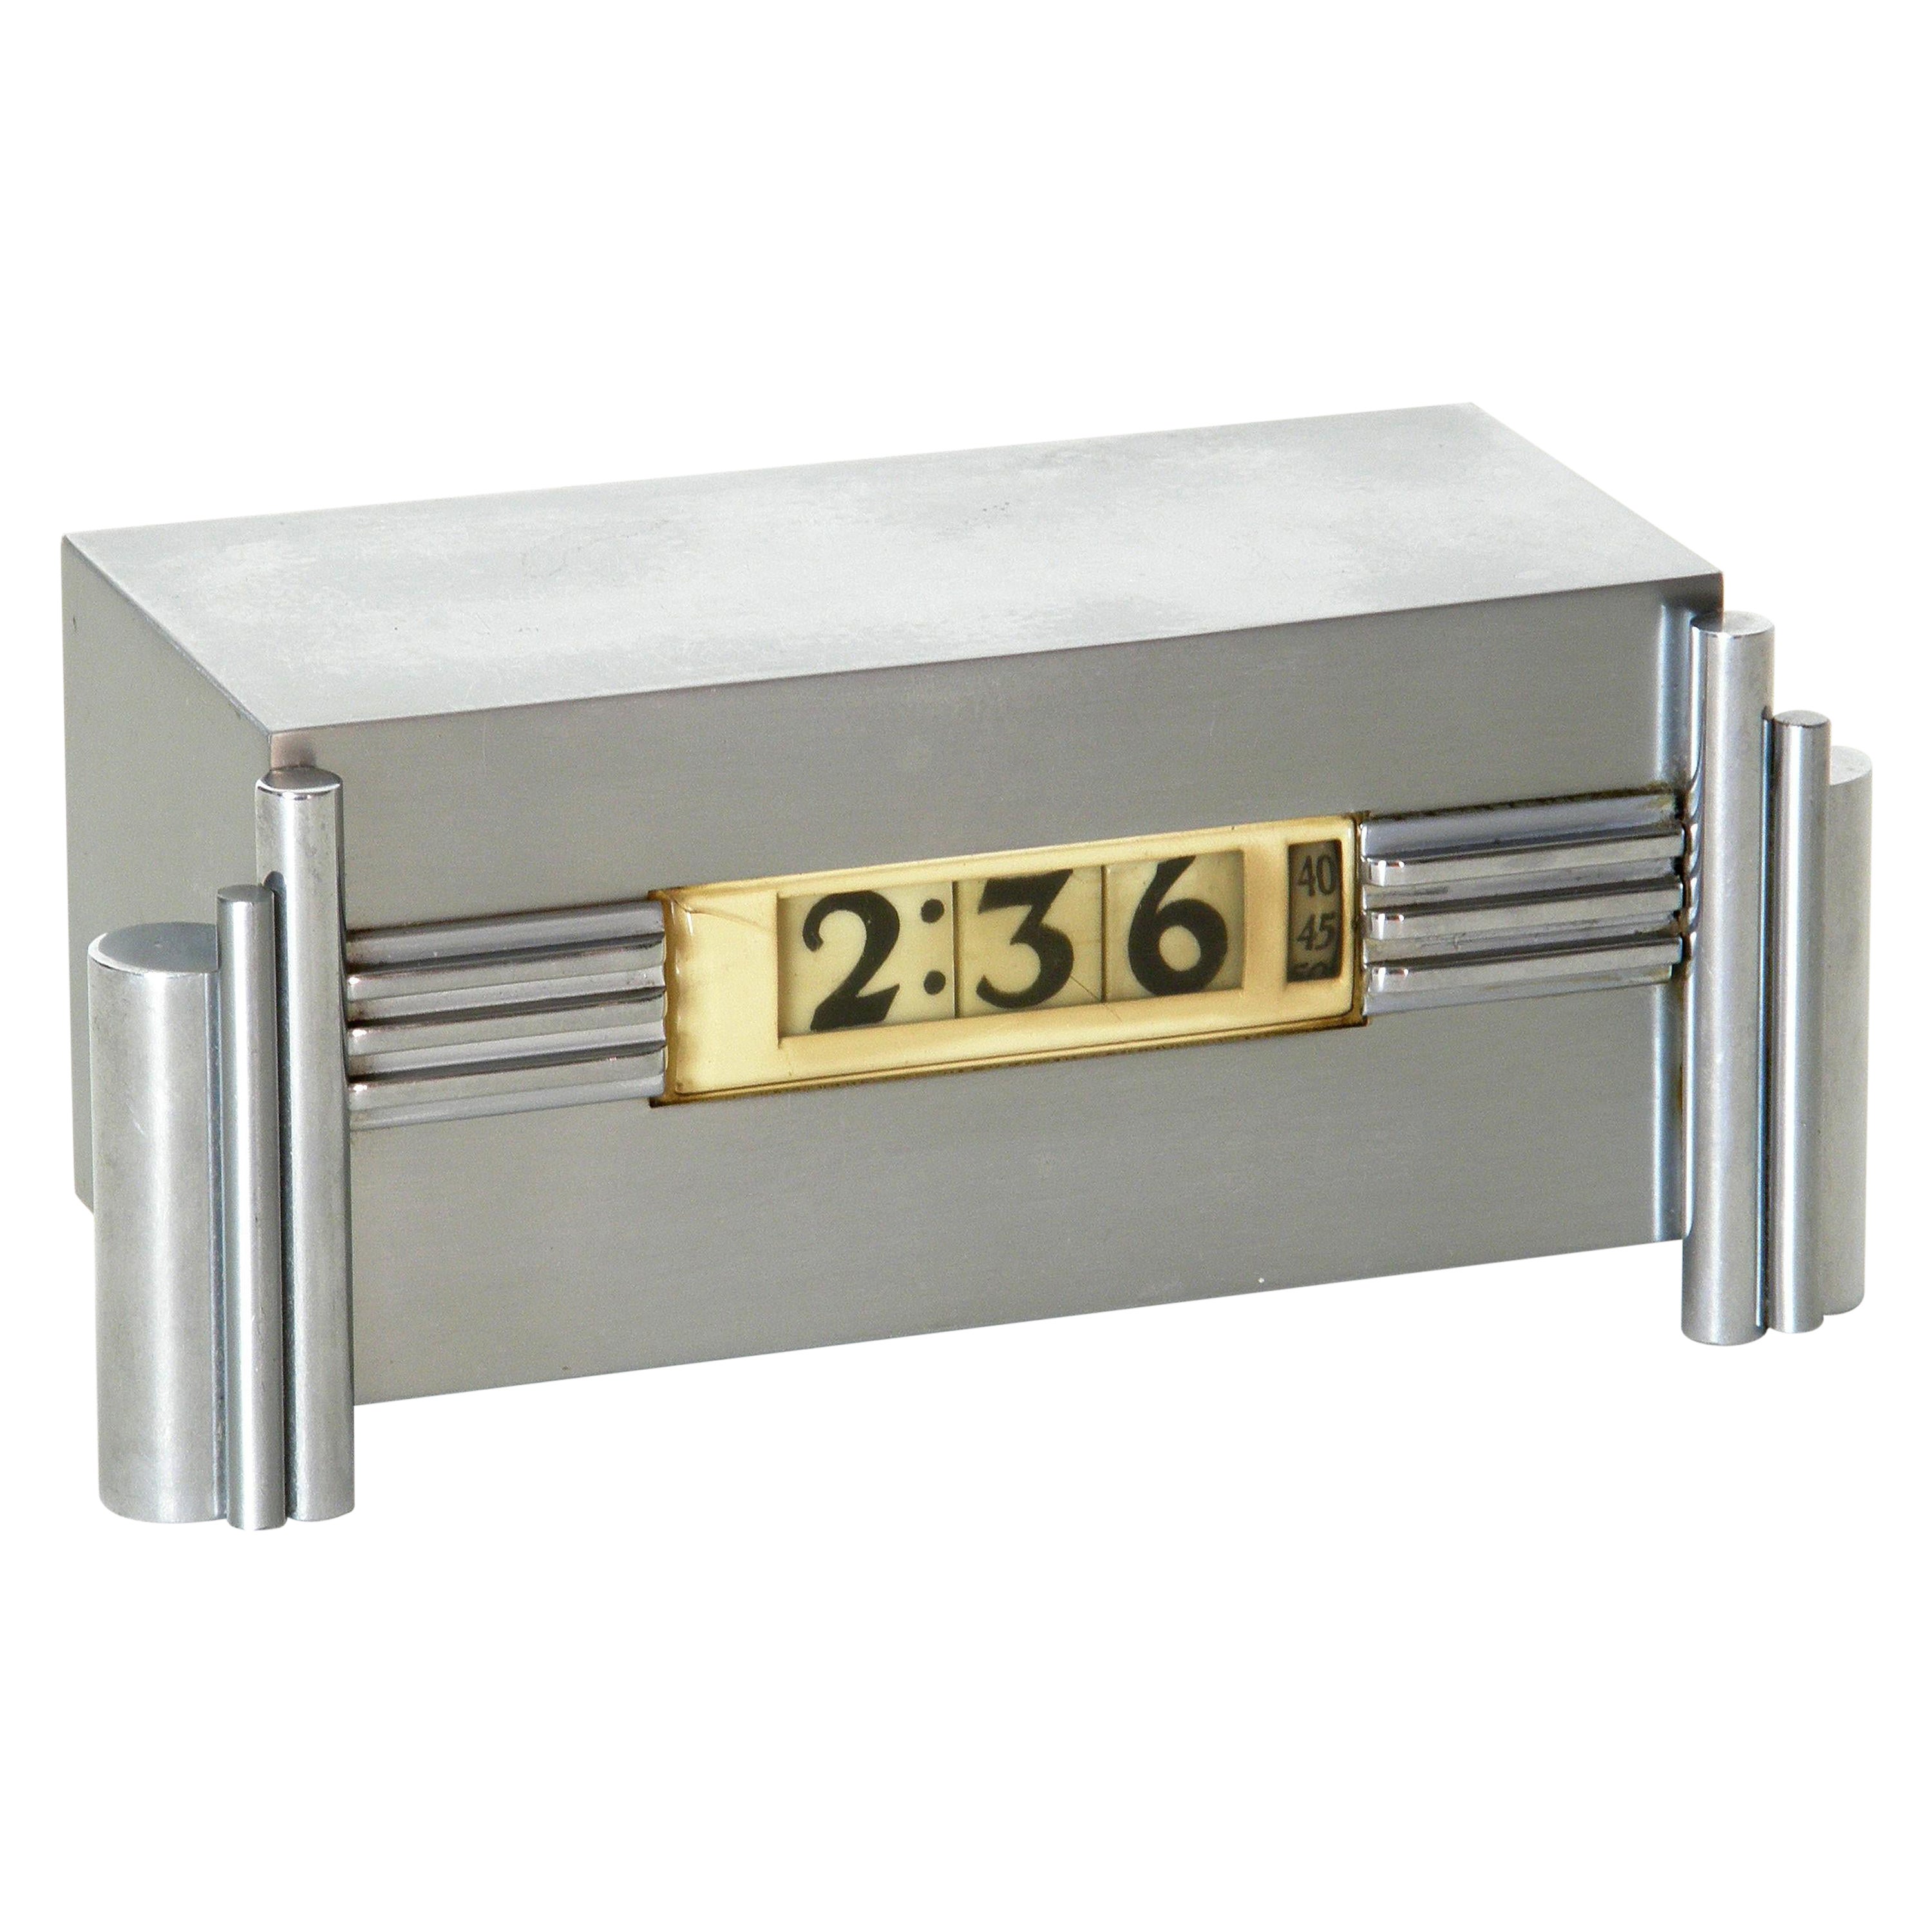 Lawson Art Deco Digital Table Clock Designed by Ferher and Adomatis For Sale